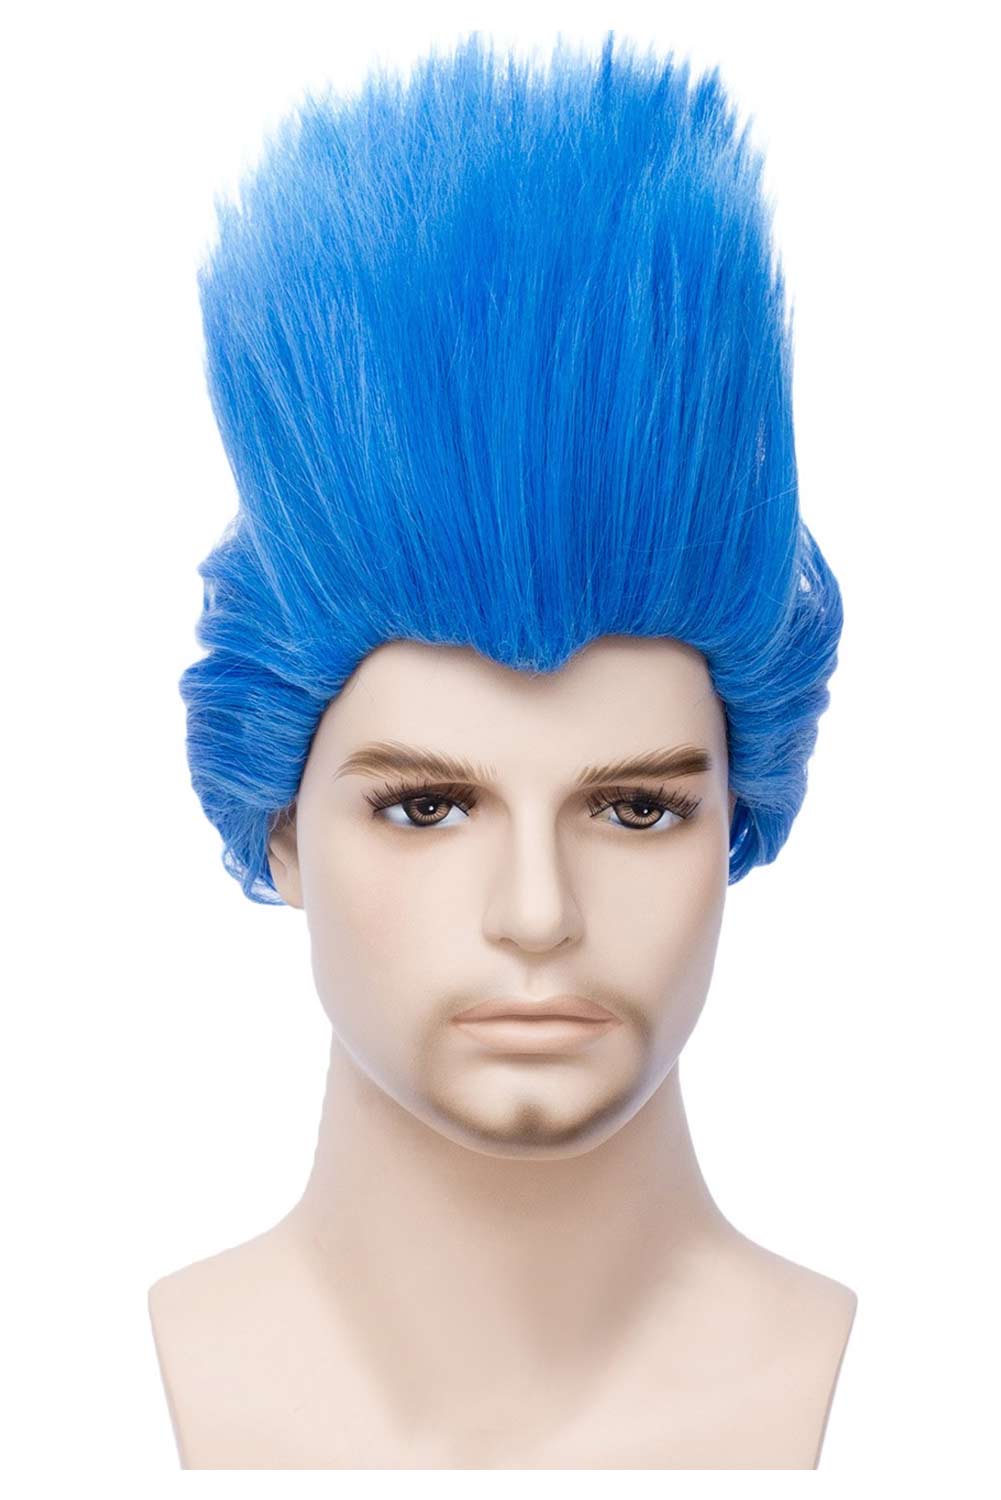 Anime Hercules Hades Cosplay Blue Wig Heat Resistant Synthetic Hair Halloween Costume Accessories